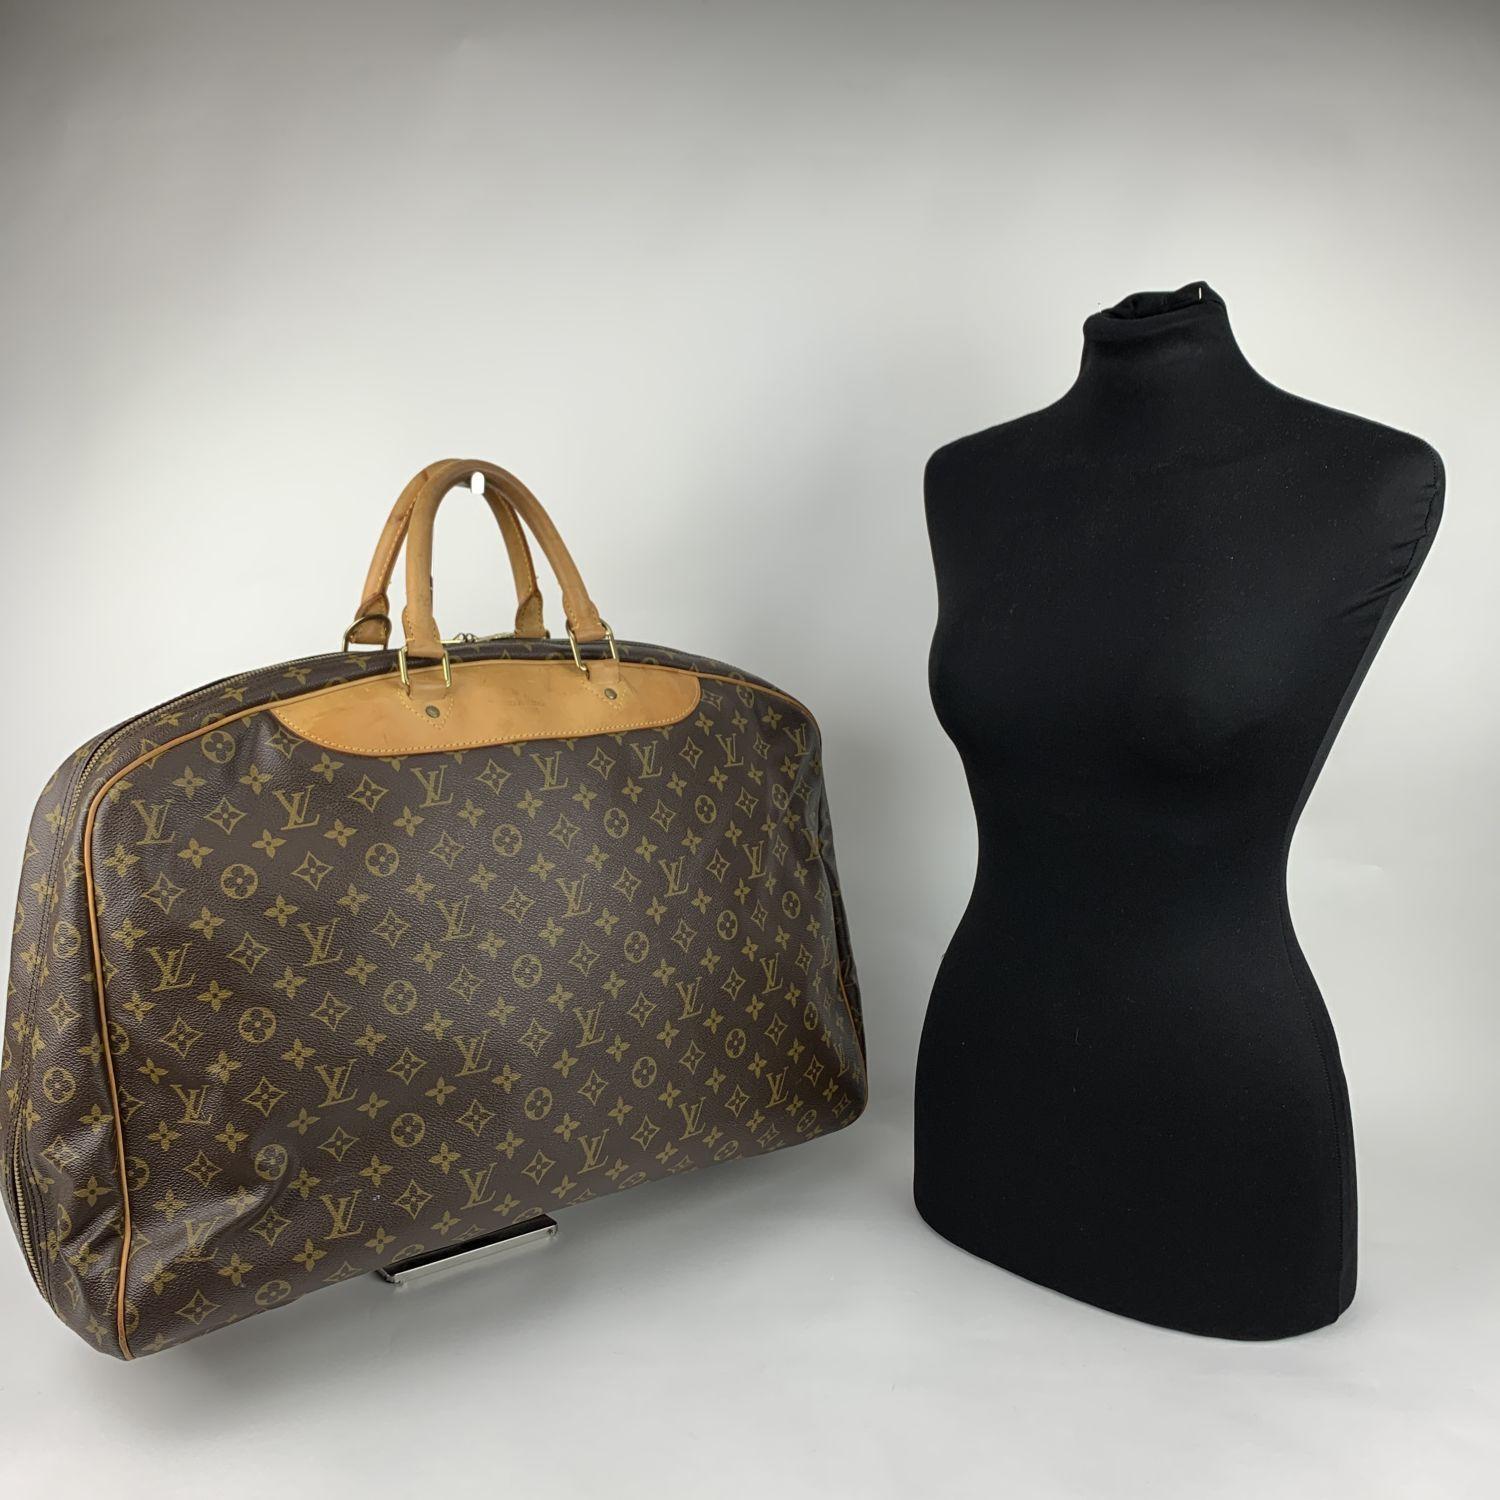 Louis Vuitton 'Alize 1 Poche' travel bag crafted in timeless monogram canvas with genuine leather trim and handles. Wrap around zipper closure. Beige washable lining with 1 side open pocket inside and 2 straps with button closure to hold a hanger.